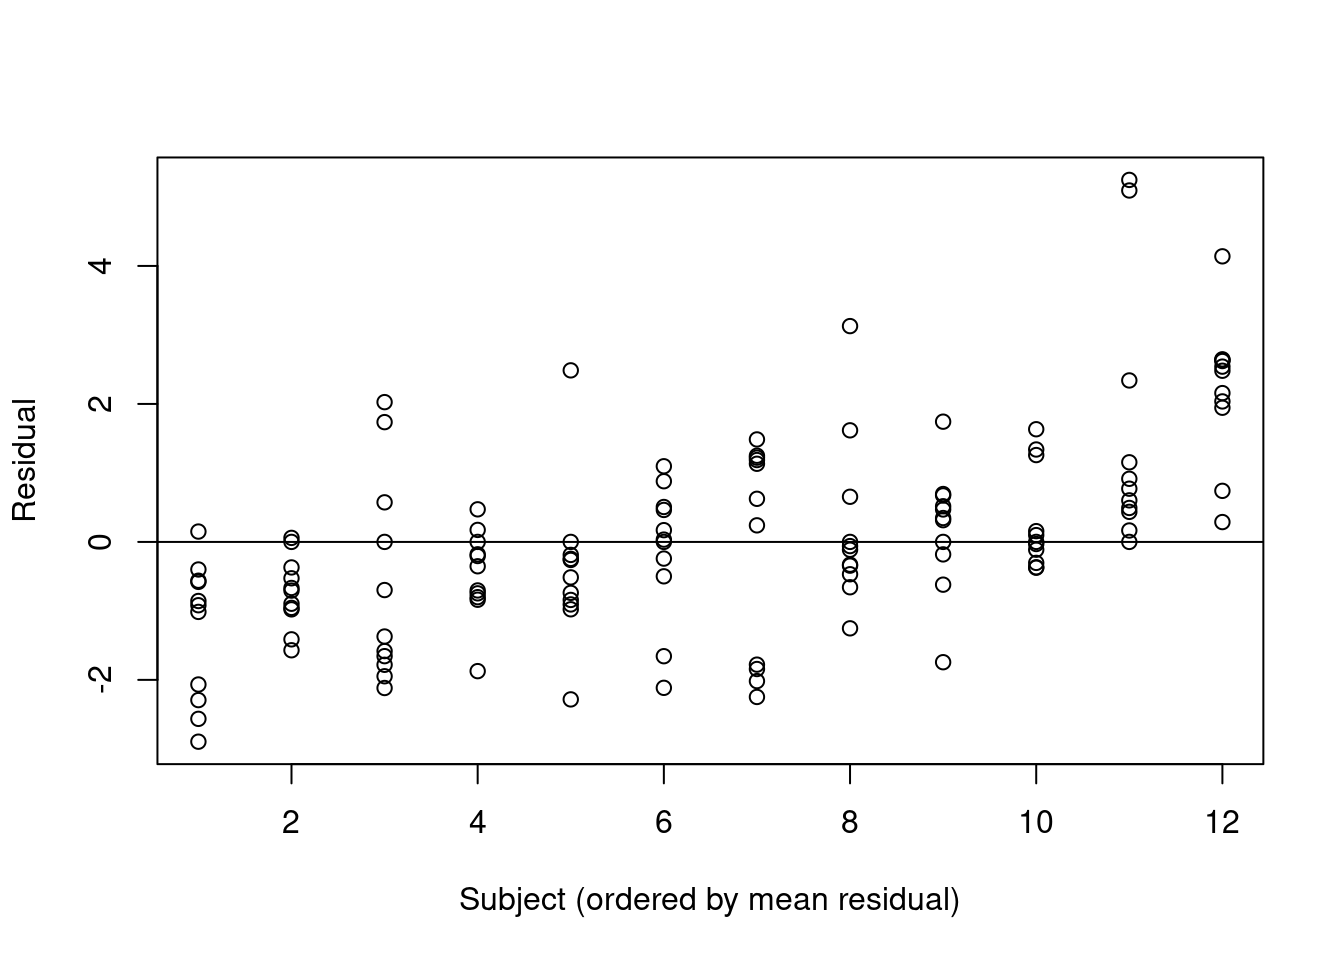 Residuals for each individual in the theopylline study, assuming a basic nonlinear model which ignores dependence